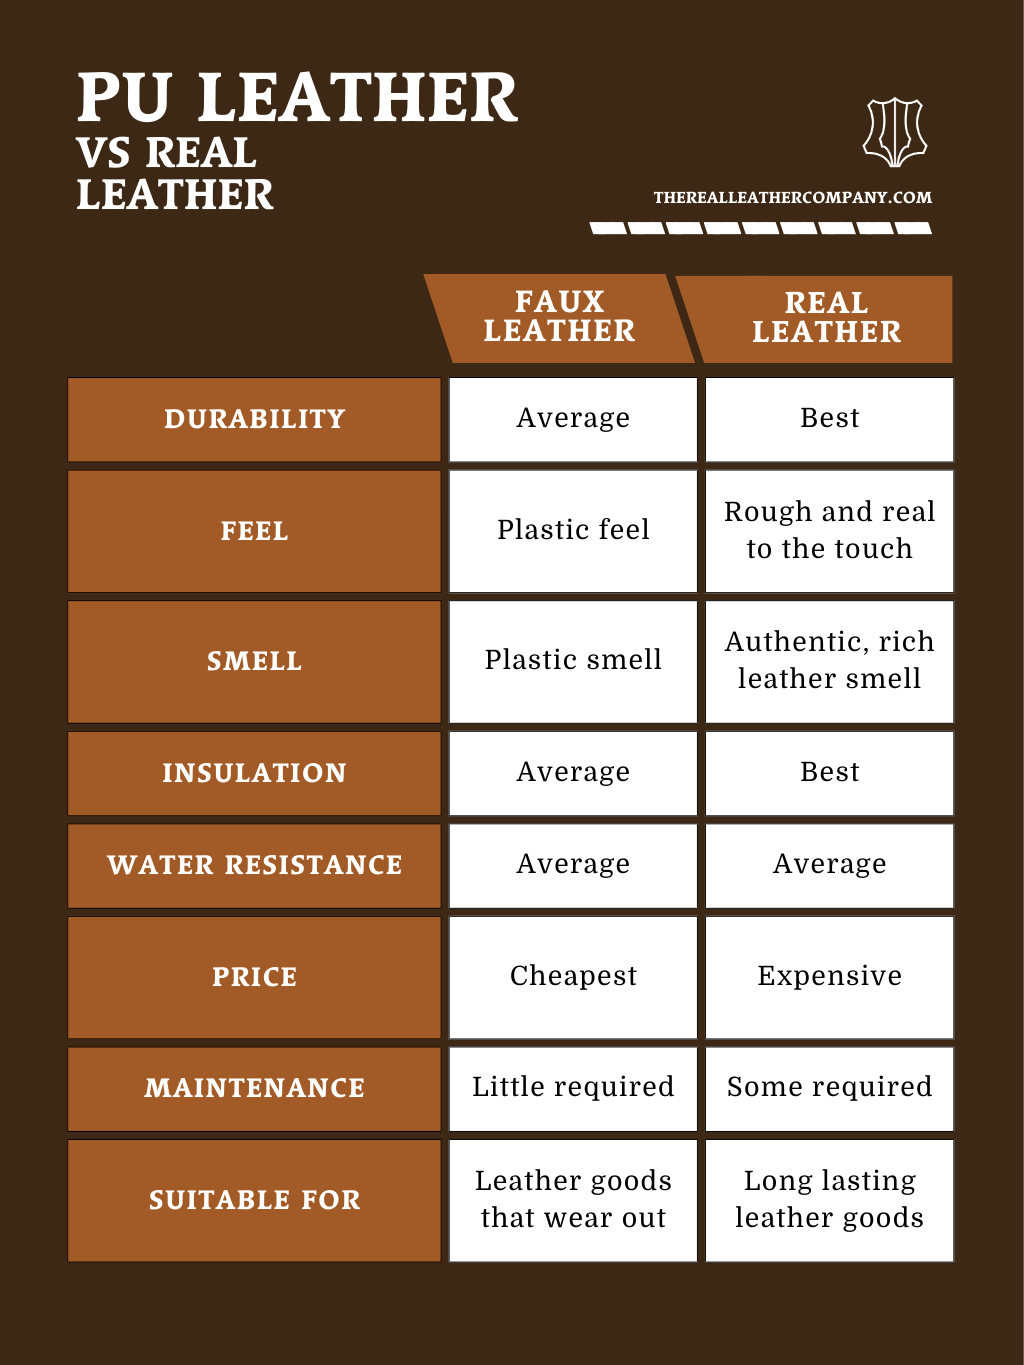 pu leather vs real leather